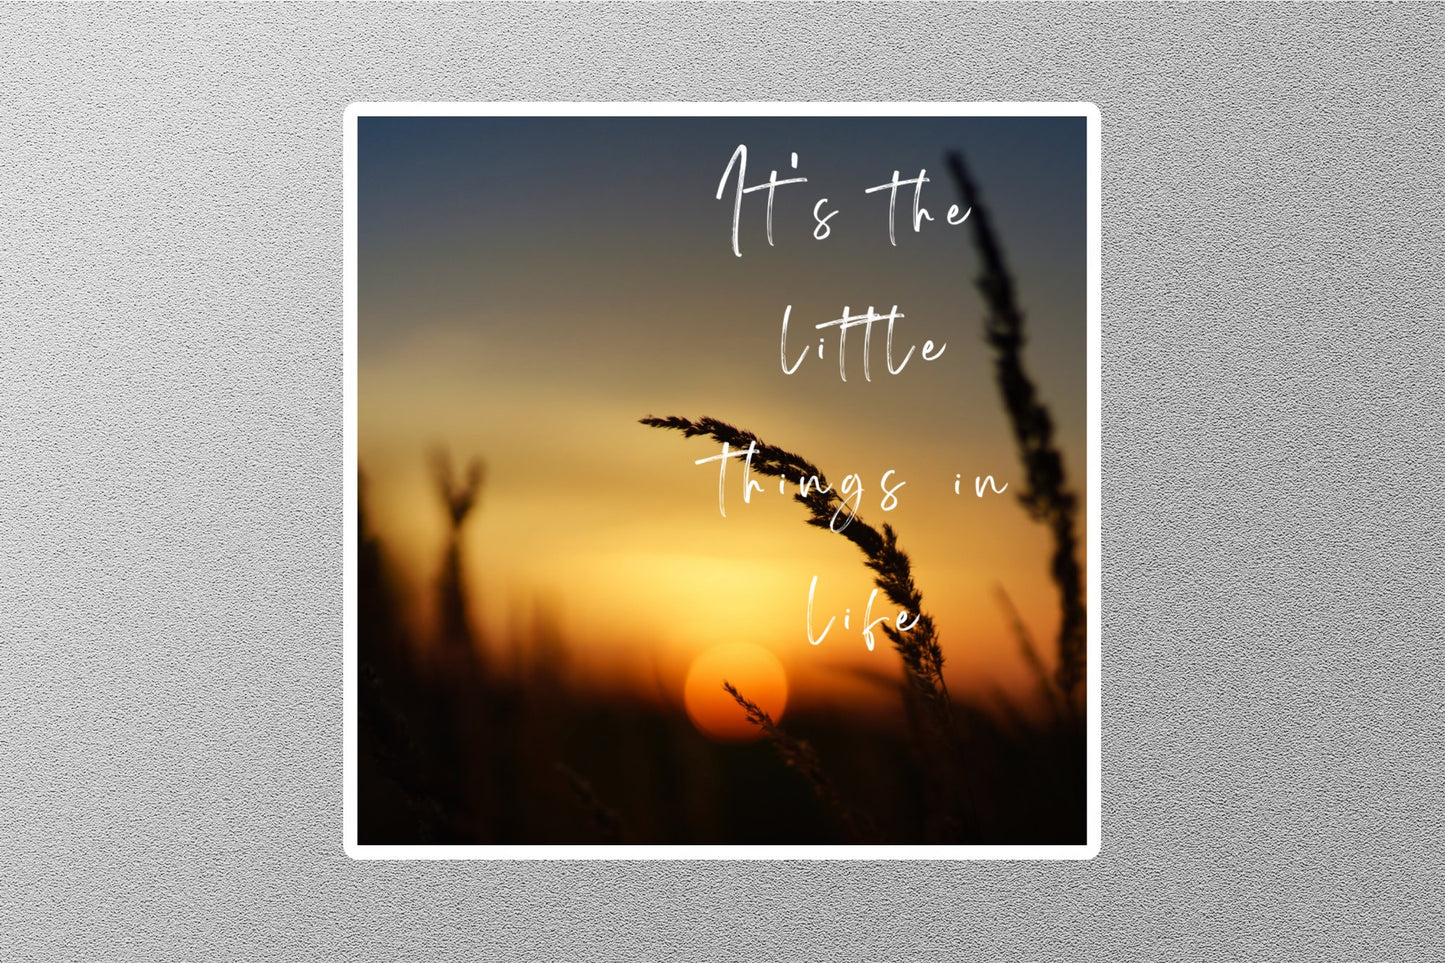 Its The Little Things In Life  Inspirational Quote Sticker